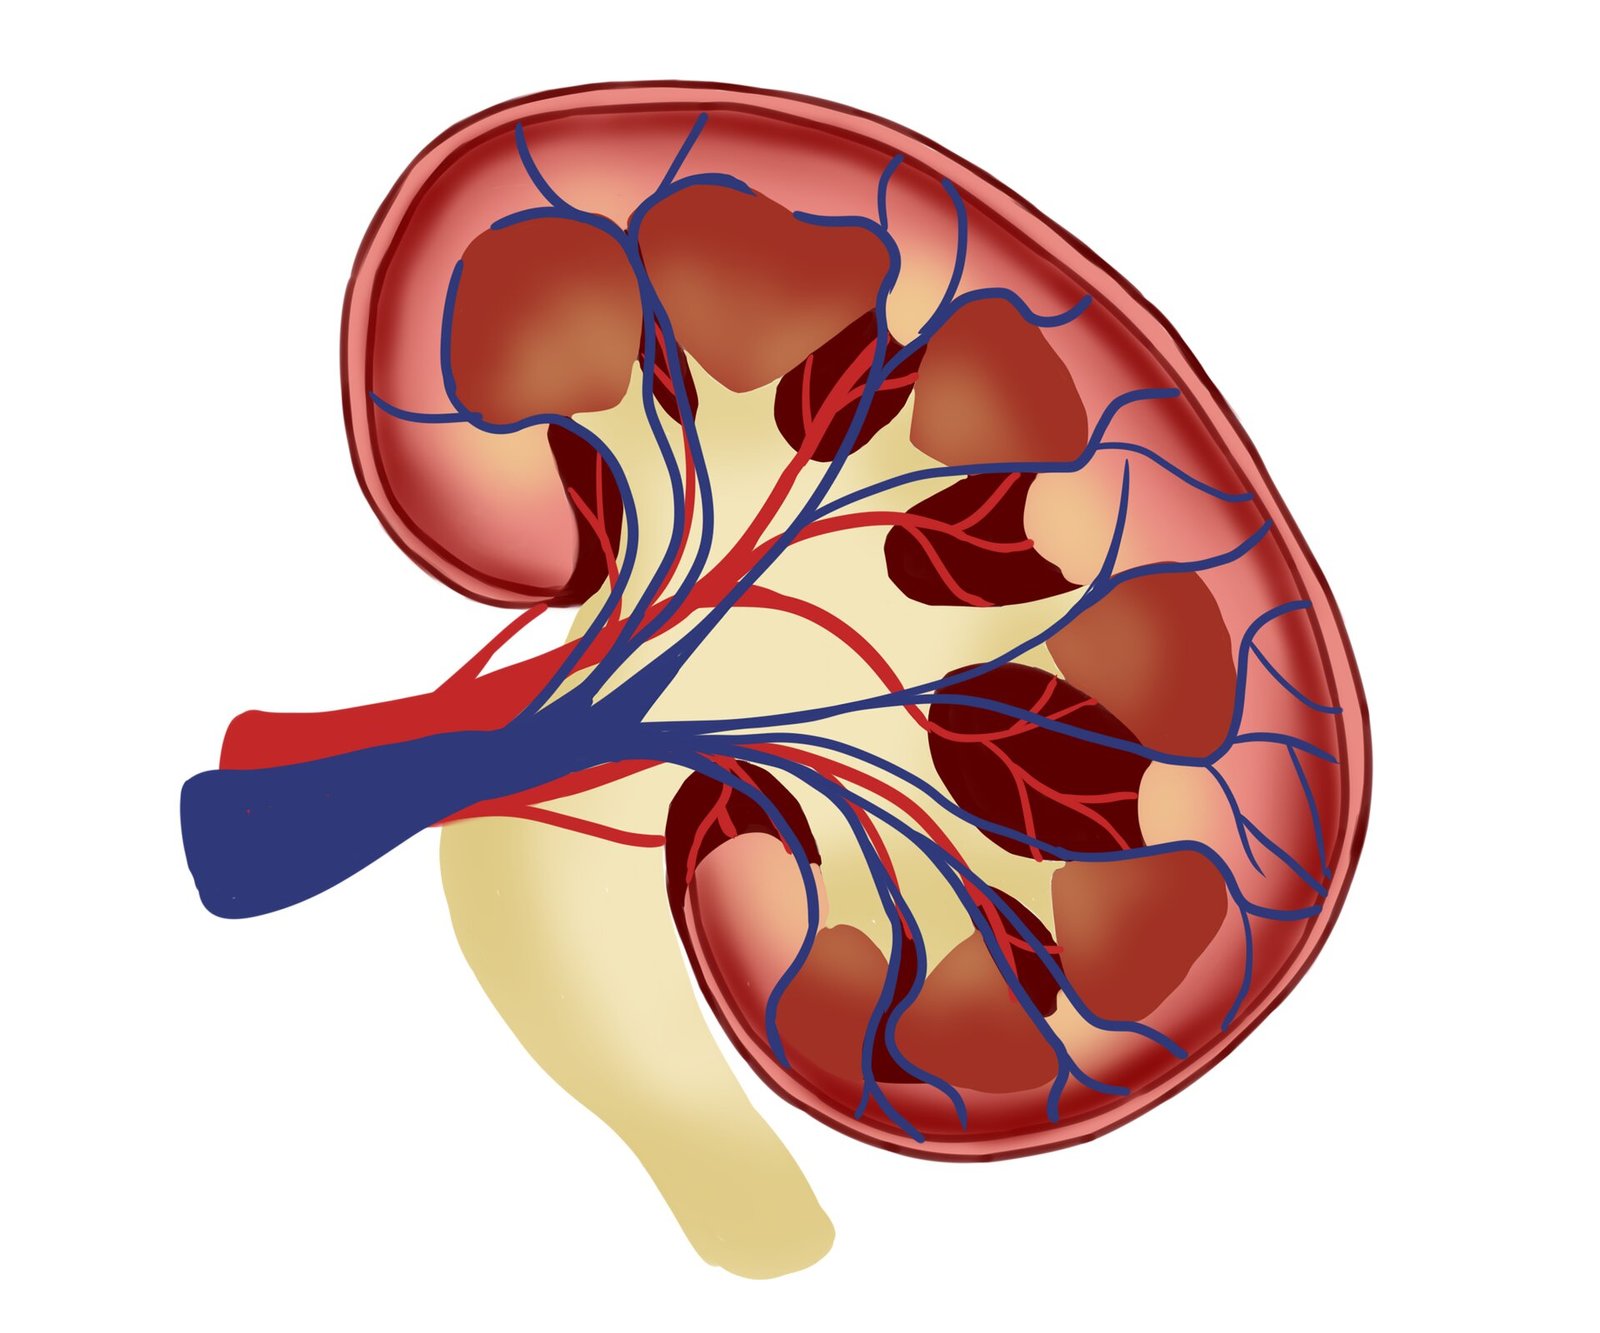 Immunotherapy post-surgery found to improve overall survival for kidney cancer